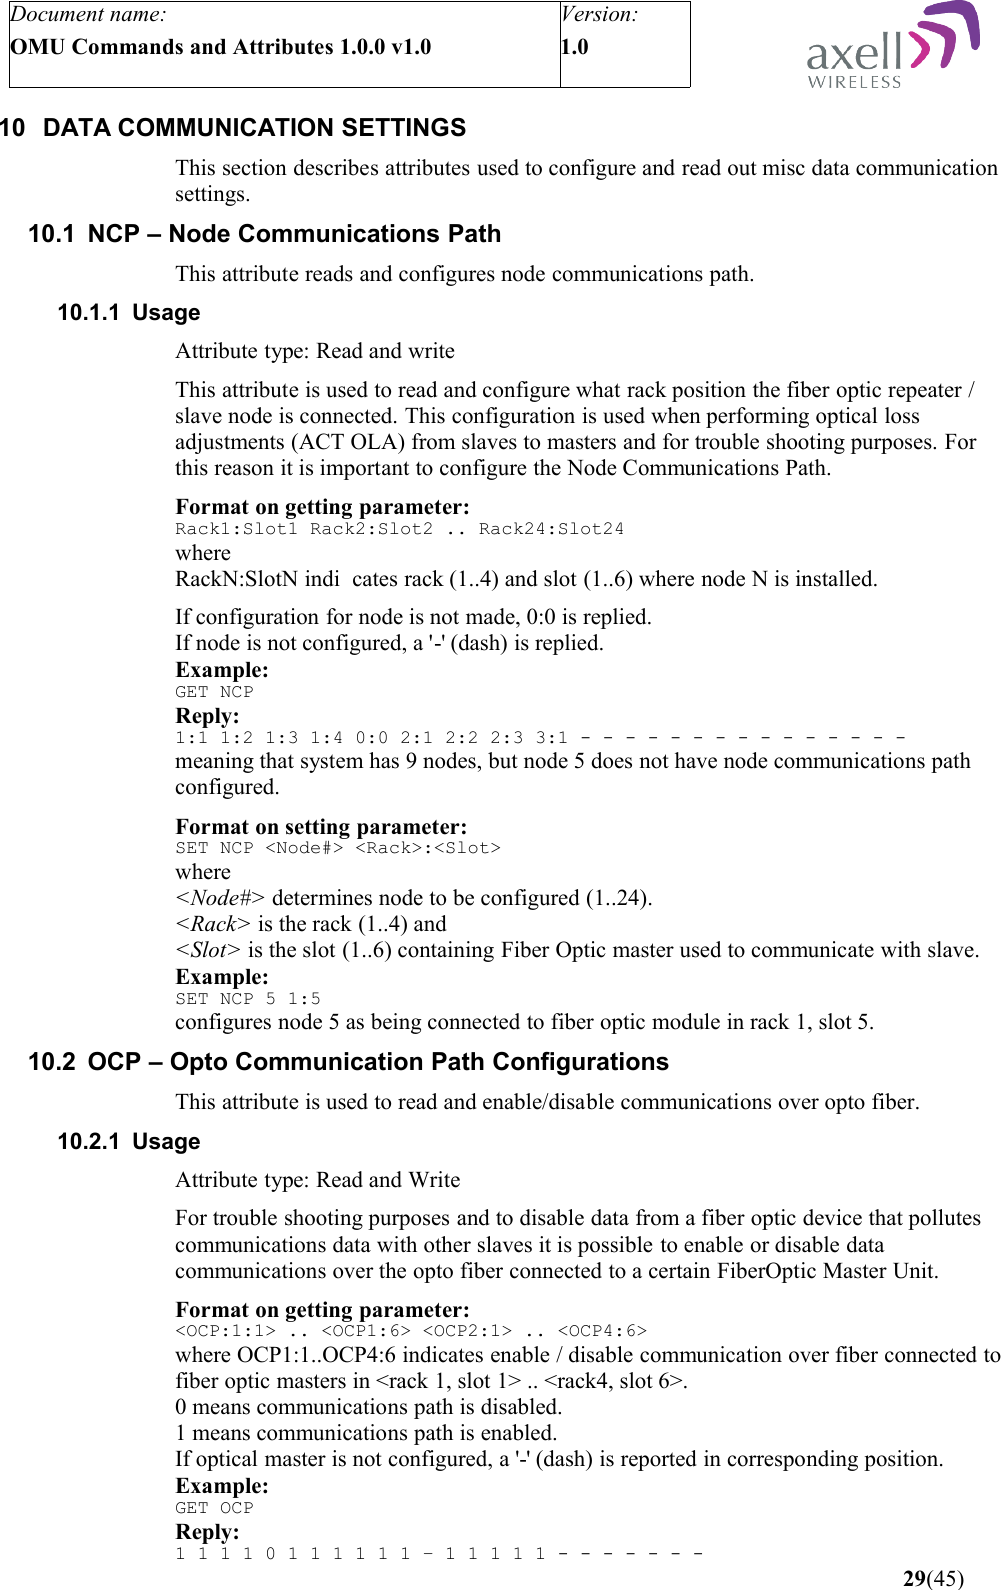 Document name:OMU Commands and Attributes 1.0.0 v1.0Version:1.0 10 DATA COMMUNICATION SETTINGSThis section describes attributes used to configure and read out misc data communication settings.10.1 NCP – Node Communications PathThis attribute reads and configures node communications path.10.1.1 UsageAttribute type: Read and writeThis attribute is used to read and configure what rack position the fiber optic repeater / slave node is connected. This configuration is used when performing optical loss adjustments (ACT OLA) from slaves to masters and for trouble shooting purposes. For this reason it is important to configure the Node Communications Path.Format on getting parameter:Rack1:Slot1 Rack2:Slot2 .. Rack24:Slot24where RackN:SlotN indi cates rack (1..4) and slot (1..6) where node N is installed.If configuration for node is not made, 0:0 is replied.If node is not configured, a &apos;-&apos; (dash) is replied.Example:GET NCPReply:1:1 1:2 1:3 1:4 0:0 2:1 2:2 2:3 3:1 - - - - - - - - - - - - - - -meaning that system has 9 nodes, but node 5 does not have node communications path configured.Format on setting parameter:SET NCP &lt;Node#&gt; &lt;Rack&gt;:&lt;Slot&gt;where&lt;Node#&gt; determines node to be configured (1..24).&lt;Rack&gt; is the rack (1..4) and&lt;Slot&gt; is the slot (1..6) containing Fiber Optic master used to communicate with slave.Example:SET NCP 5 1:5configures node 5 as being connected to fiber optic module in rack 1, slot 5.10.2 OCP – Opto Communication Path ConfigurationsThis attribute is used to read and enable/disable communications over opto fiber.10.2.1 UsageAttribute type: Read and WriteFor trouble shooting purposes and to disable data from a fiber optic device that pollutes communications data with other slaves it is possible to enable or disable data communications over the opto fiber connected to a certain FiberOptic Master Unit.Format on getting parameter:&lt;OCP:1:1&gt; .. &lt;OCP1:6&gt; &lt;OCP2:1&gt; .. &lt;OCP4:6&gt;where OCP1:1..OCP4:6 indicates enable / disable communication over fiber connected to fiber optic masters in &lt;rack 1, slot 1&gt; .. &lt;rack4, slot 6&gt;. 0 means communications path is disabled.1 means communications path is enabled.If optical master is not configured, a &apos;-&apos; (dash) is reported in corresponding position. Example:GET OCPReply:1 1 1 1 0 1 1 1 1 1 1 – 1 1 1 1 1 - - - - - - -    29(45)